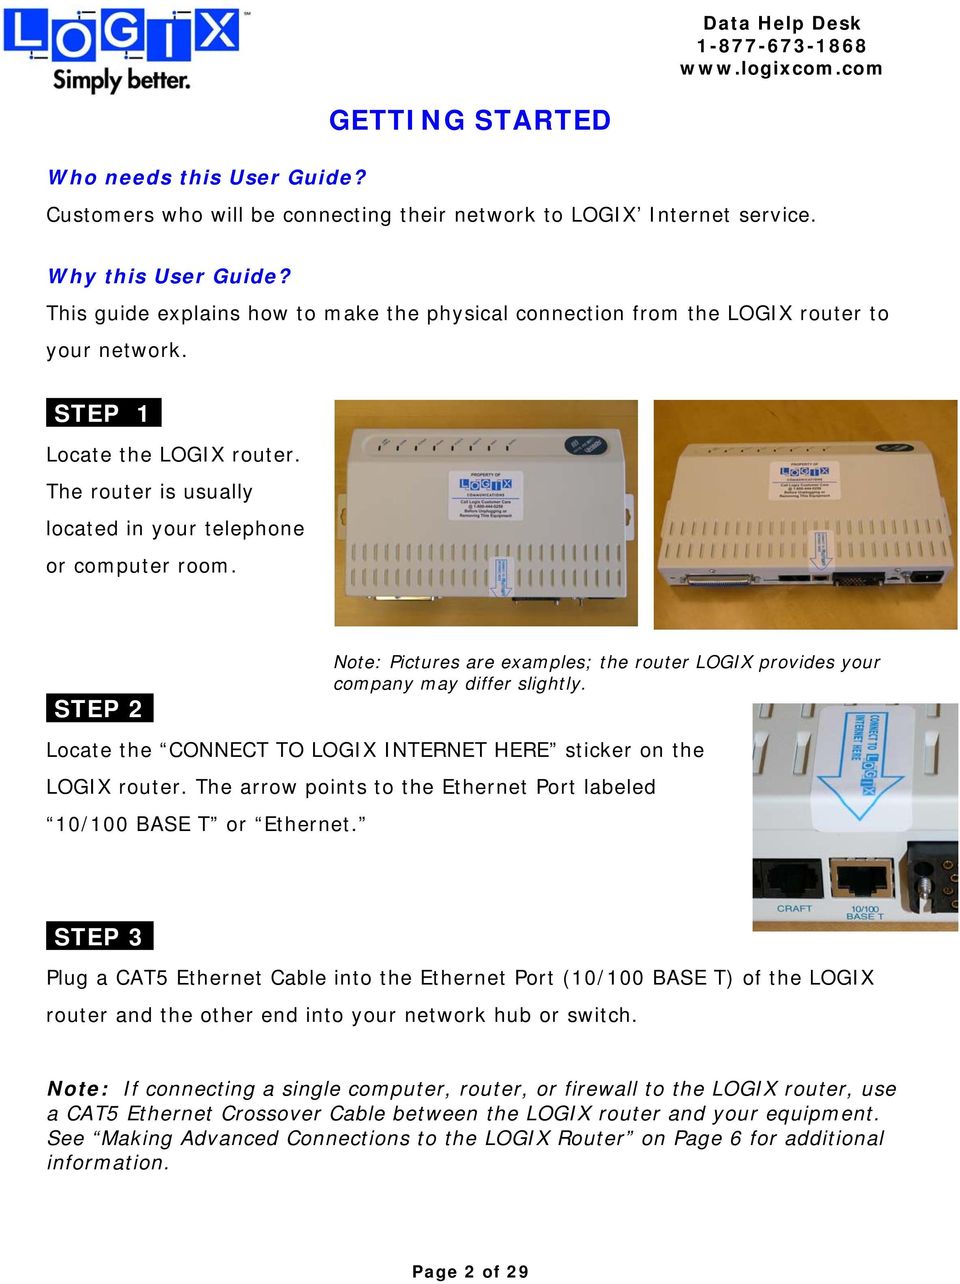 STEP 2i Note: Pictures are examples; the router LOGIX provides your company may differ slightly. Locate the CONNECT TO LOGIX INTERNET HERE sticker on the LOGIX router.